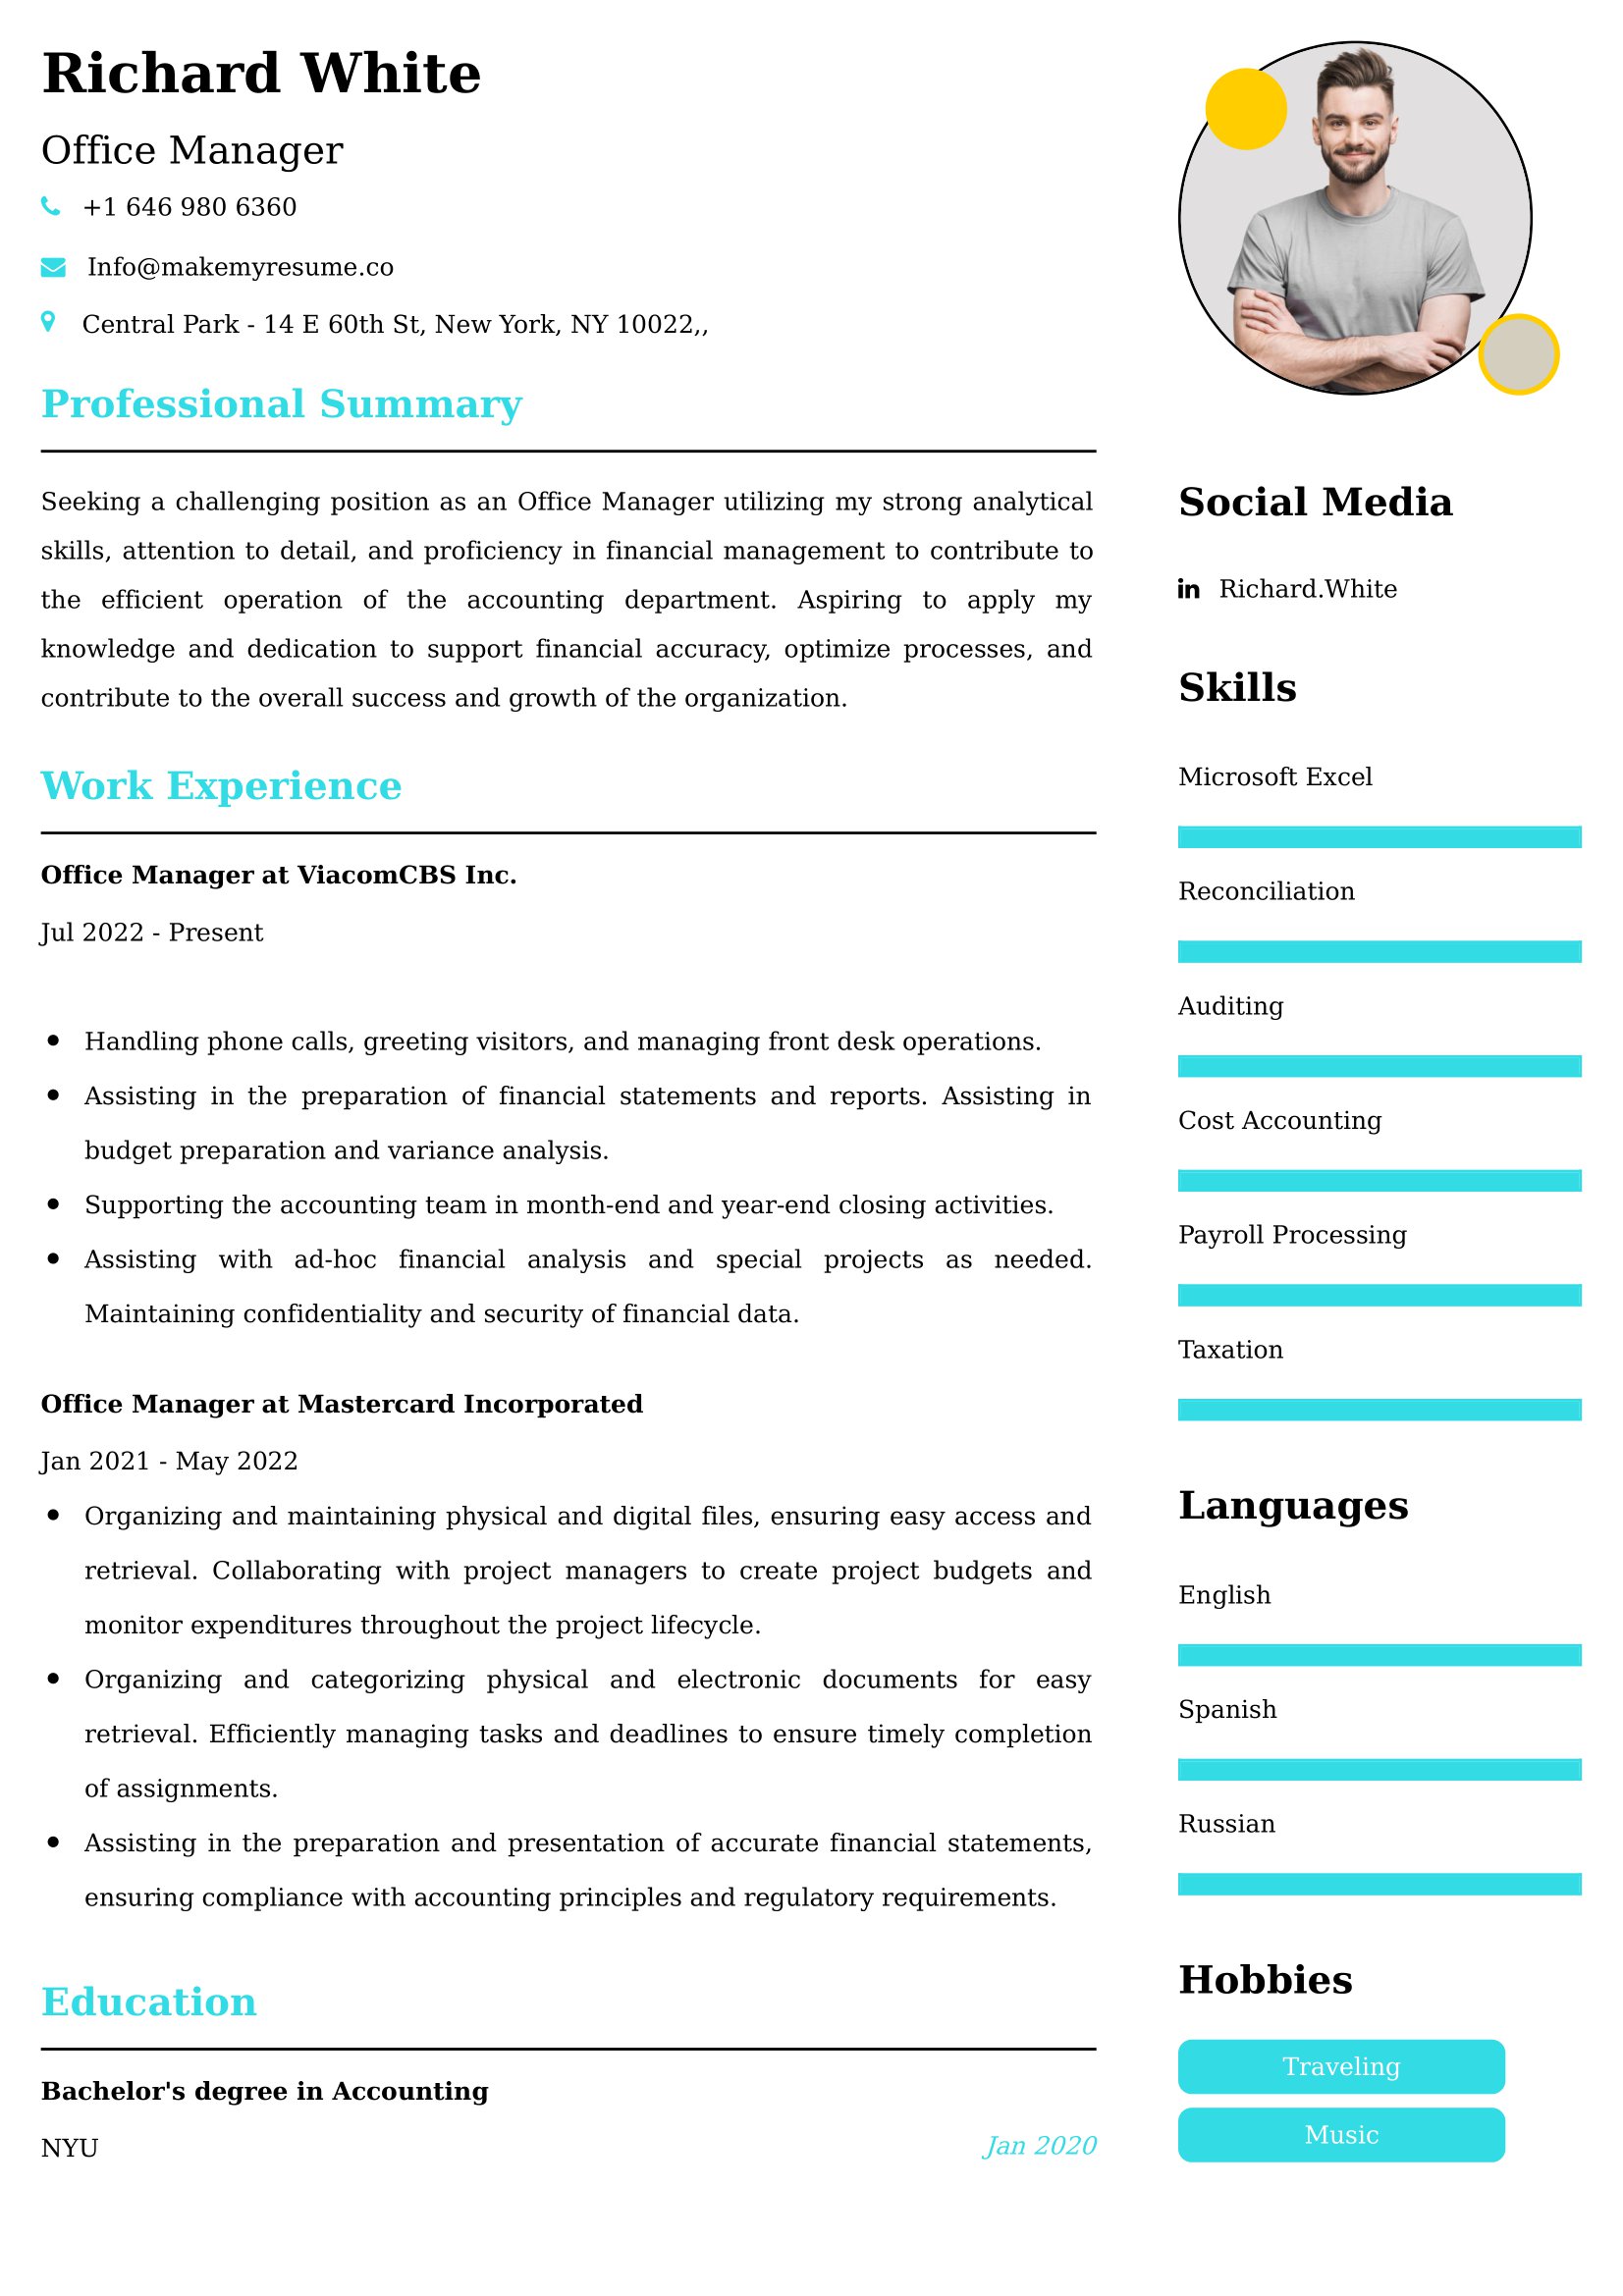 Administrative Assistant Manager Resume Examples - UK Format, Latest Template.